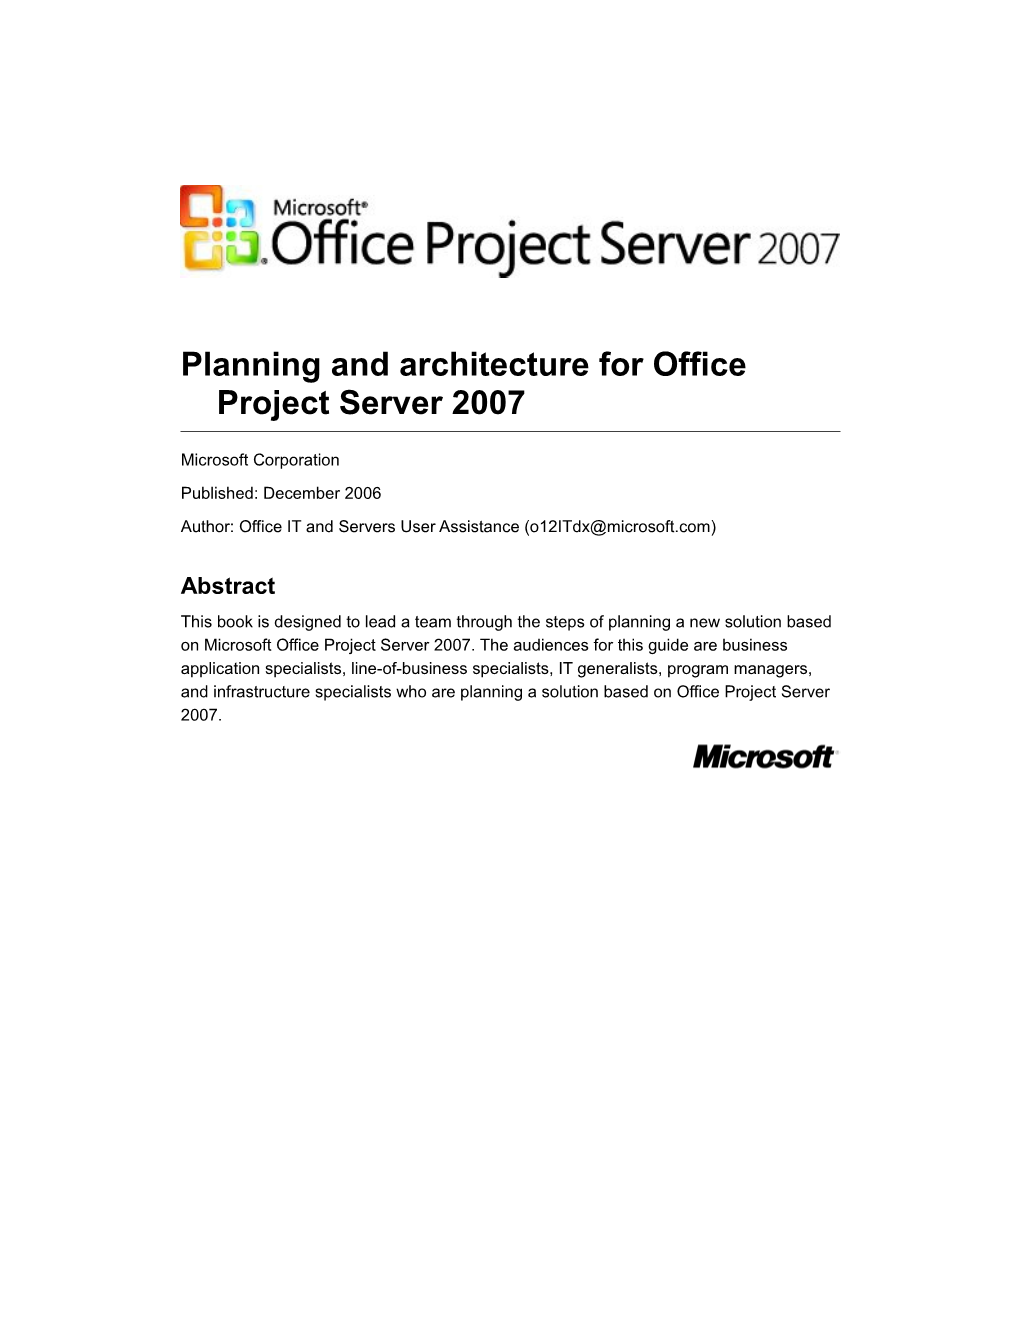 Planning and Architecture for Office Project Server 2007